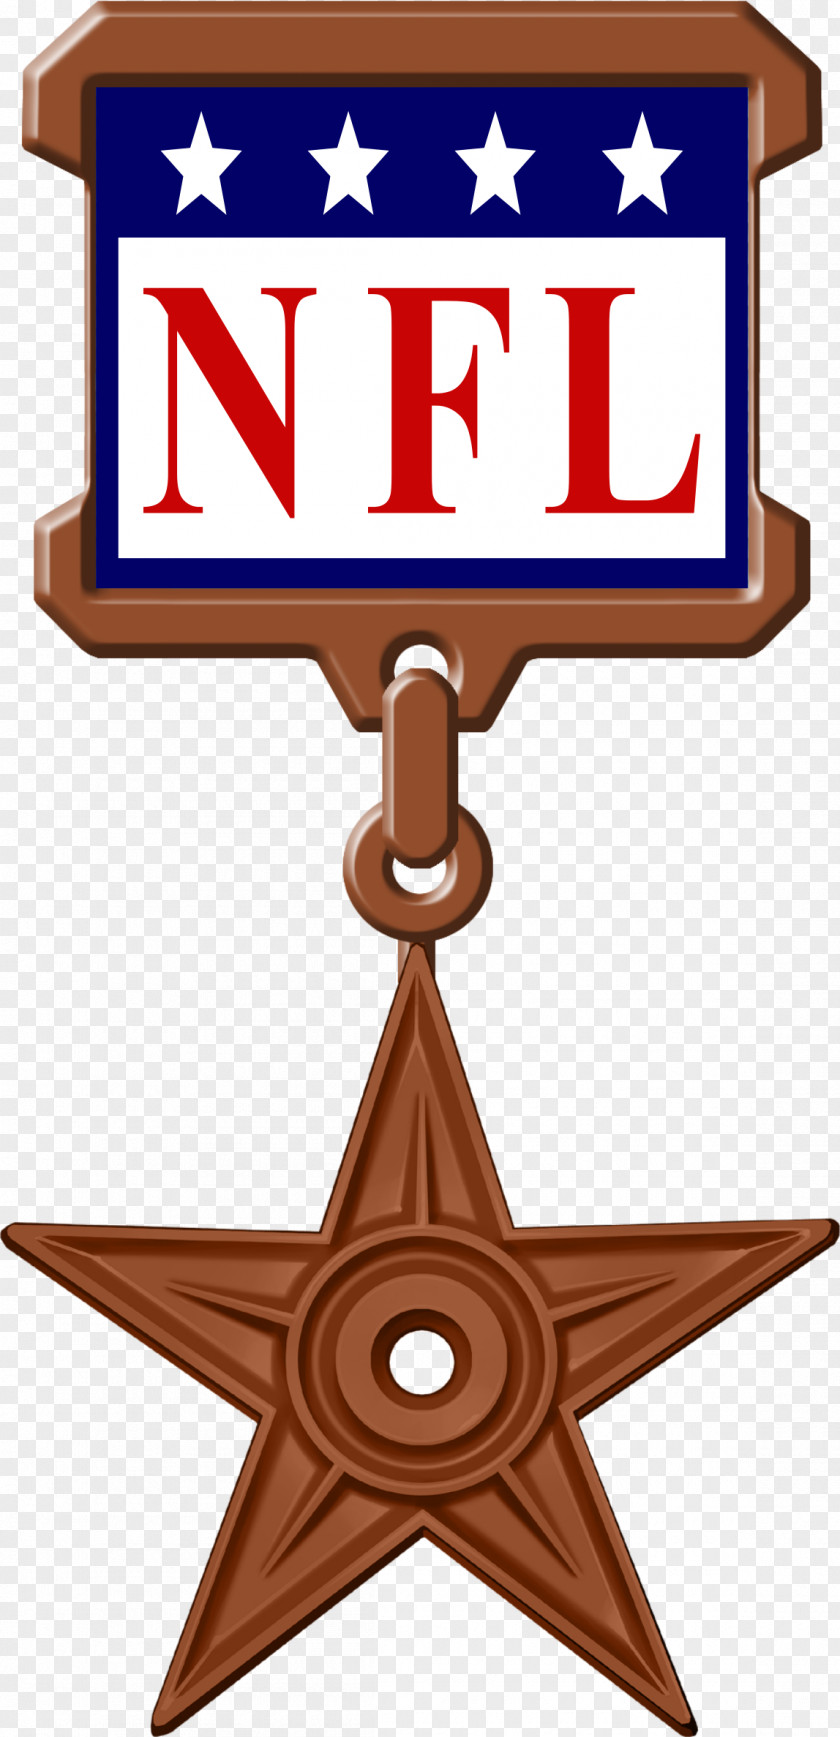 NFL Nepal East Timor English Wikipedia WikiProject PNG